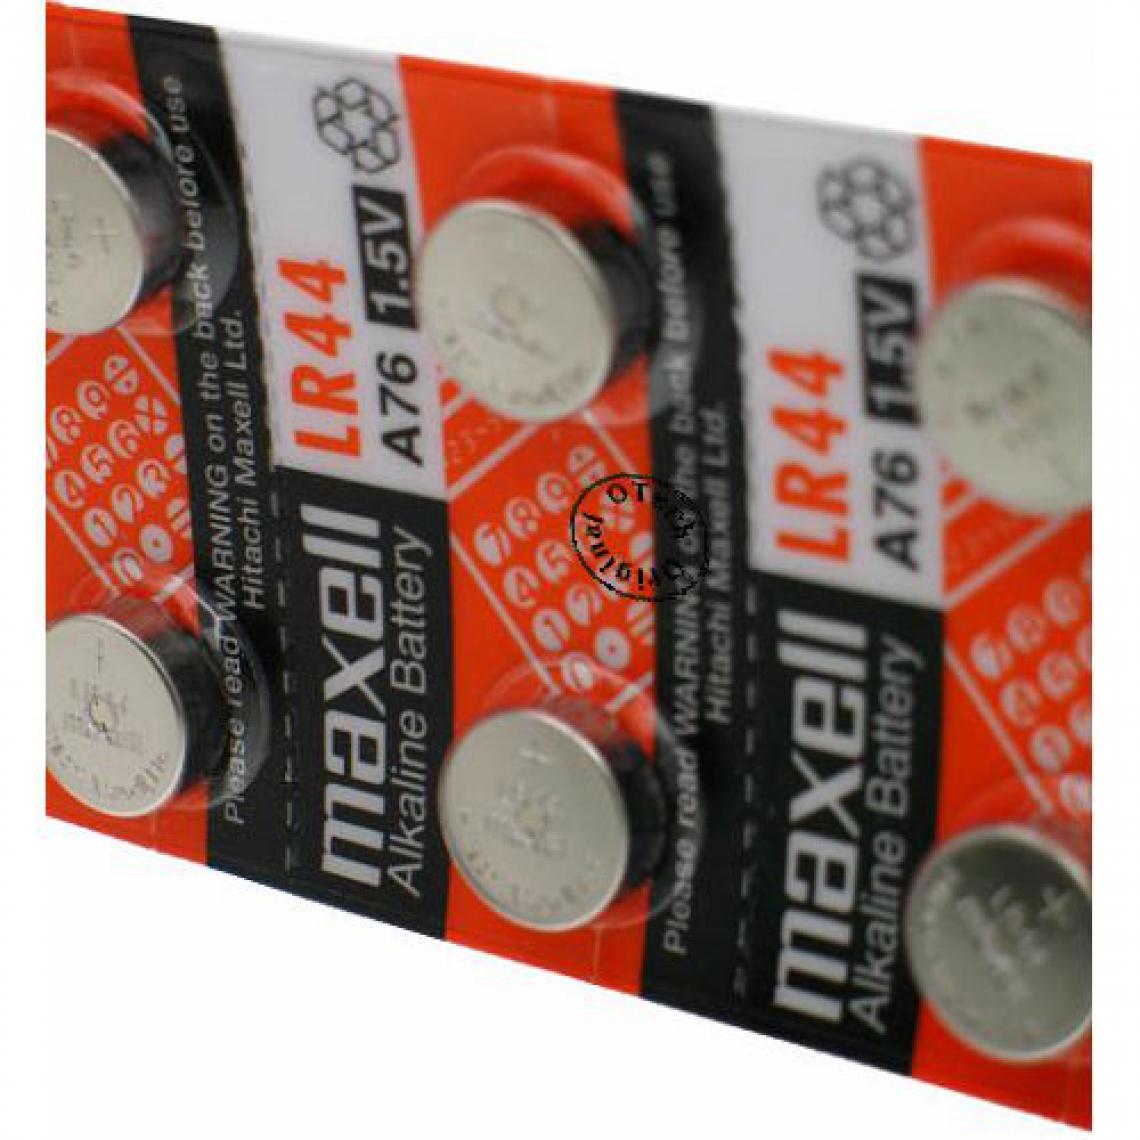 Otech - Pack de 10 piles maxell pour MAXELL A357 - Piles rechargeables